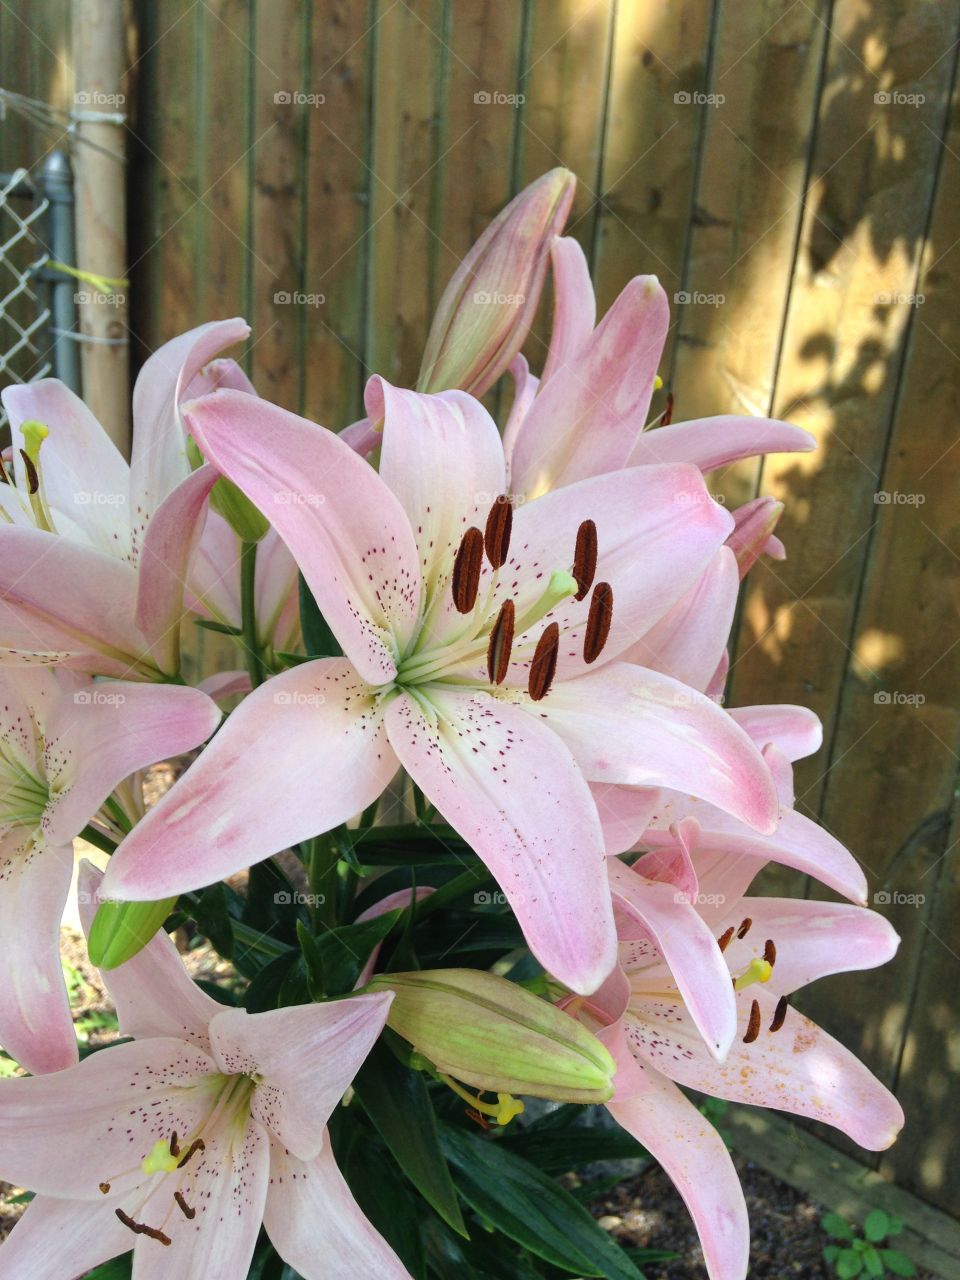 Asiatic Lily. Blooms twice a year in large amounts!